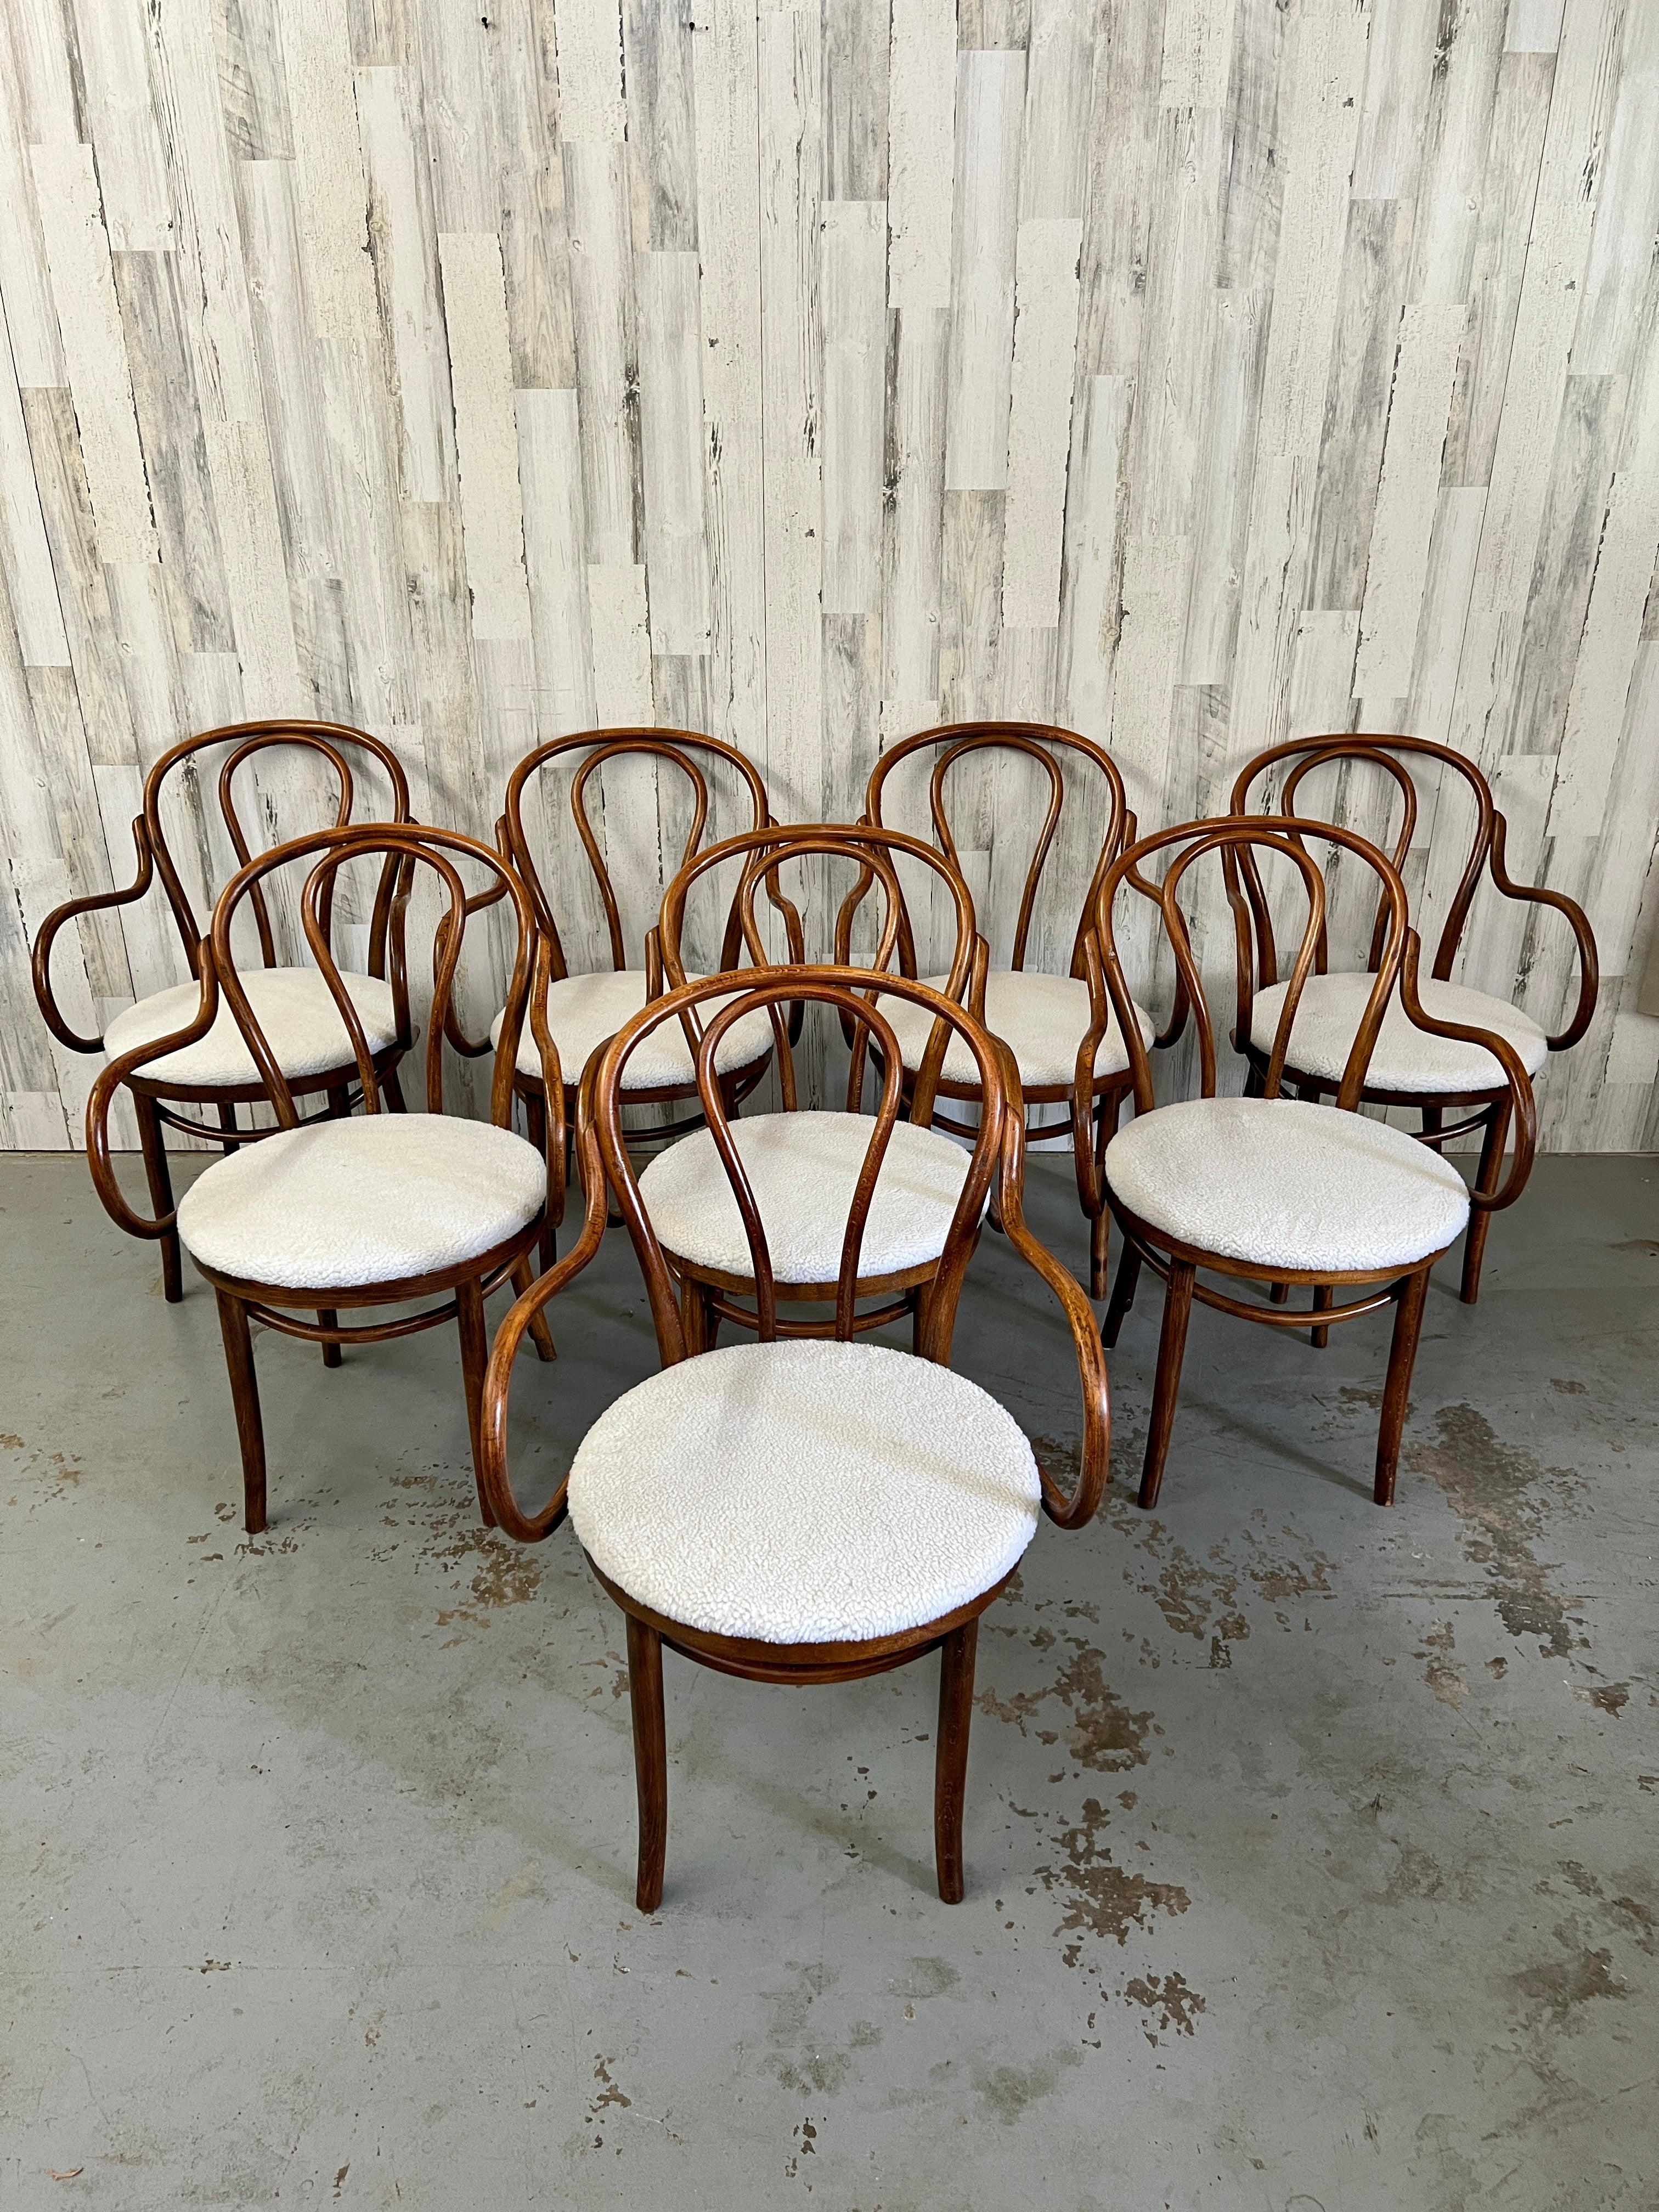 Very hard to find a set of eight bentwood arm chairs by Thonet.
New Sherpa teddy bear fabric on the seats.